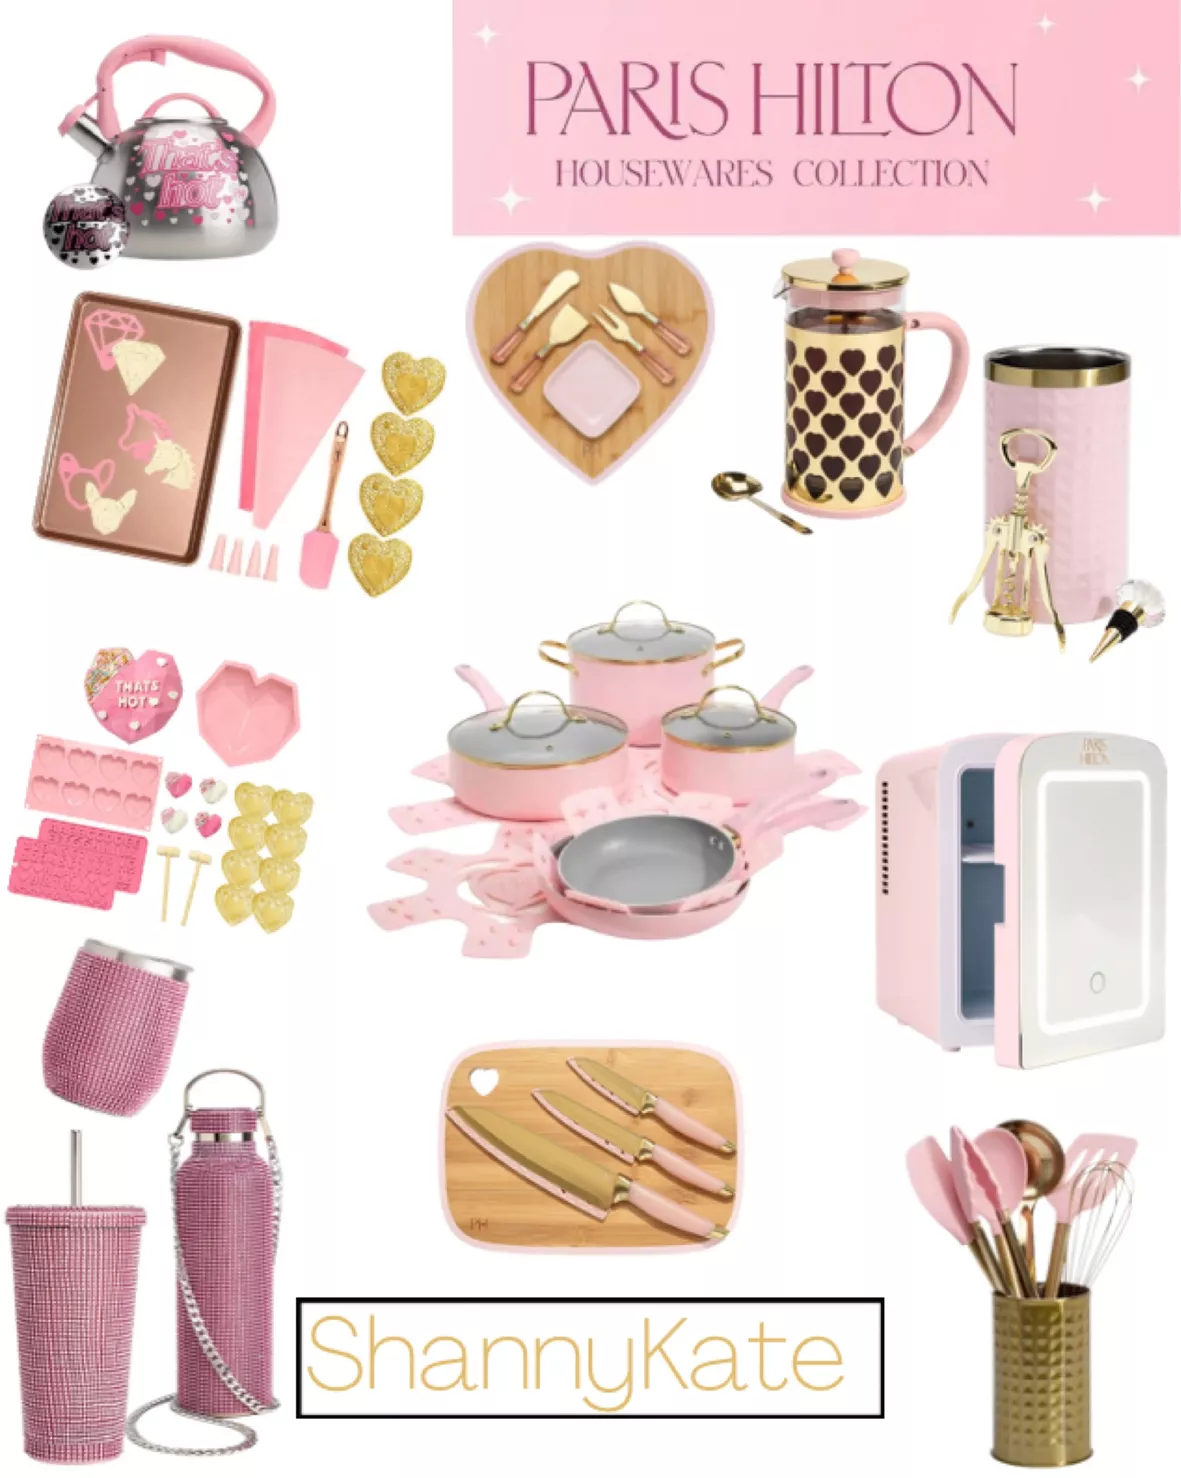 Paris Hilton Has a Housewares Collection on , and It's the